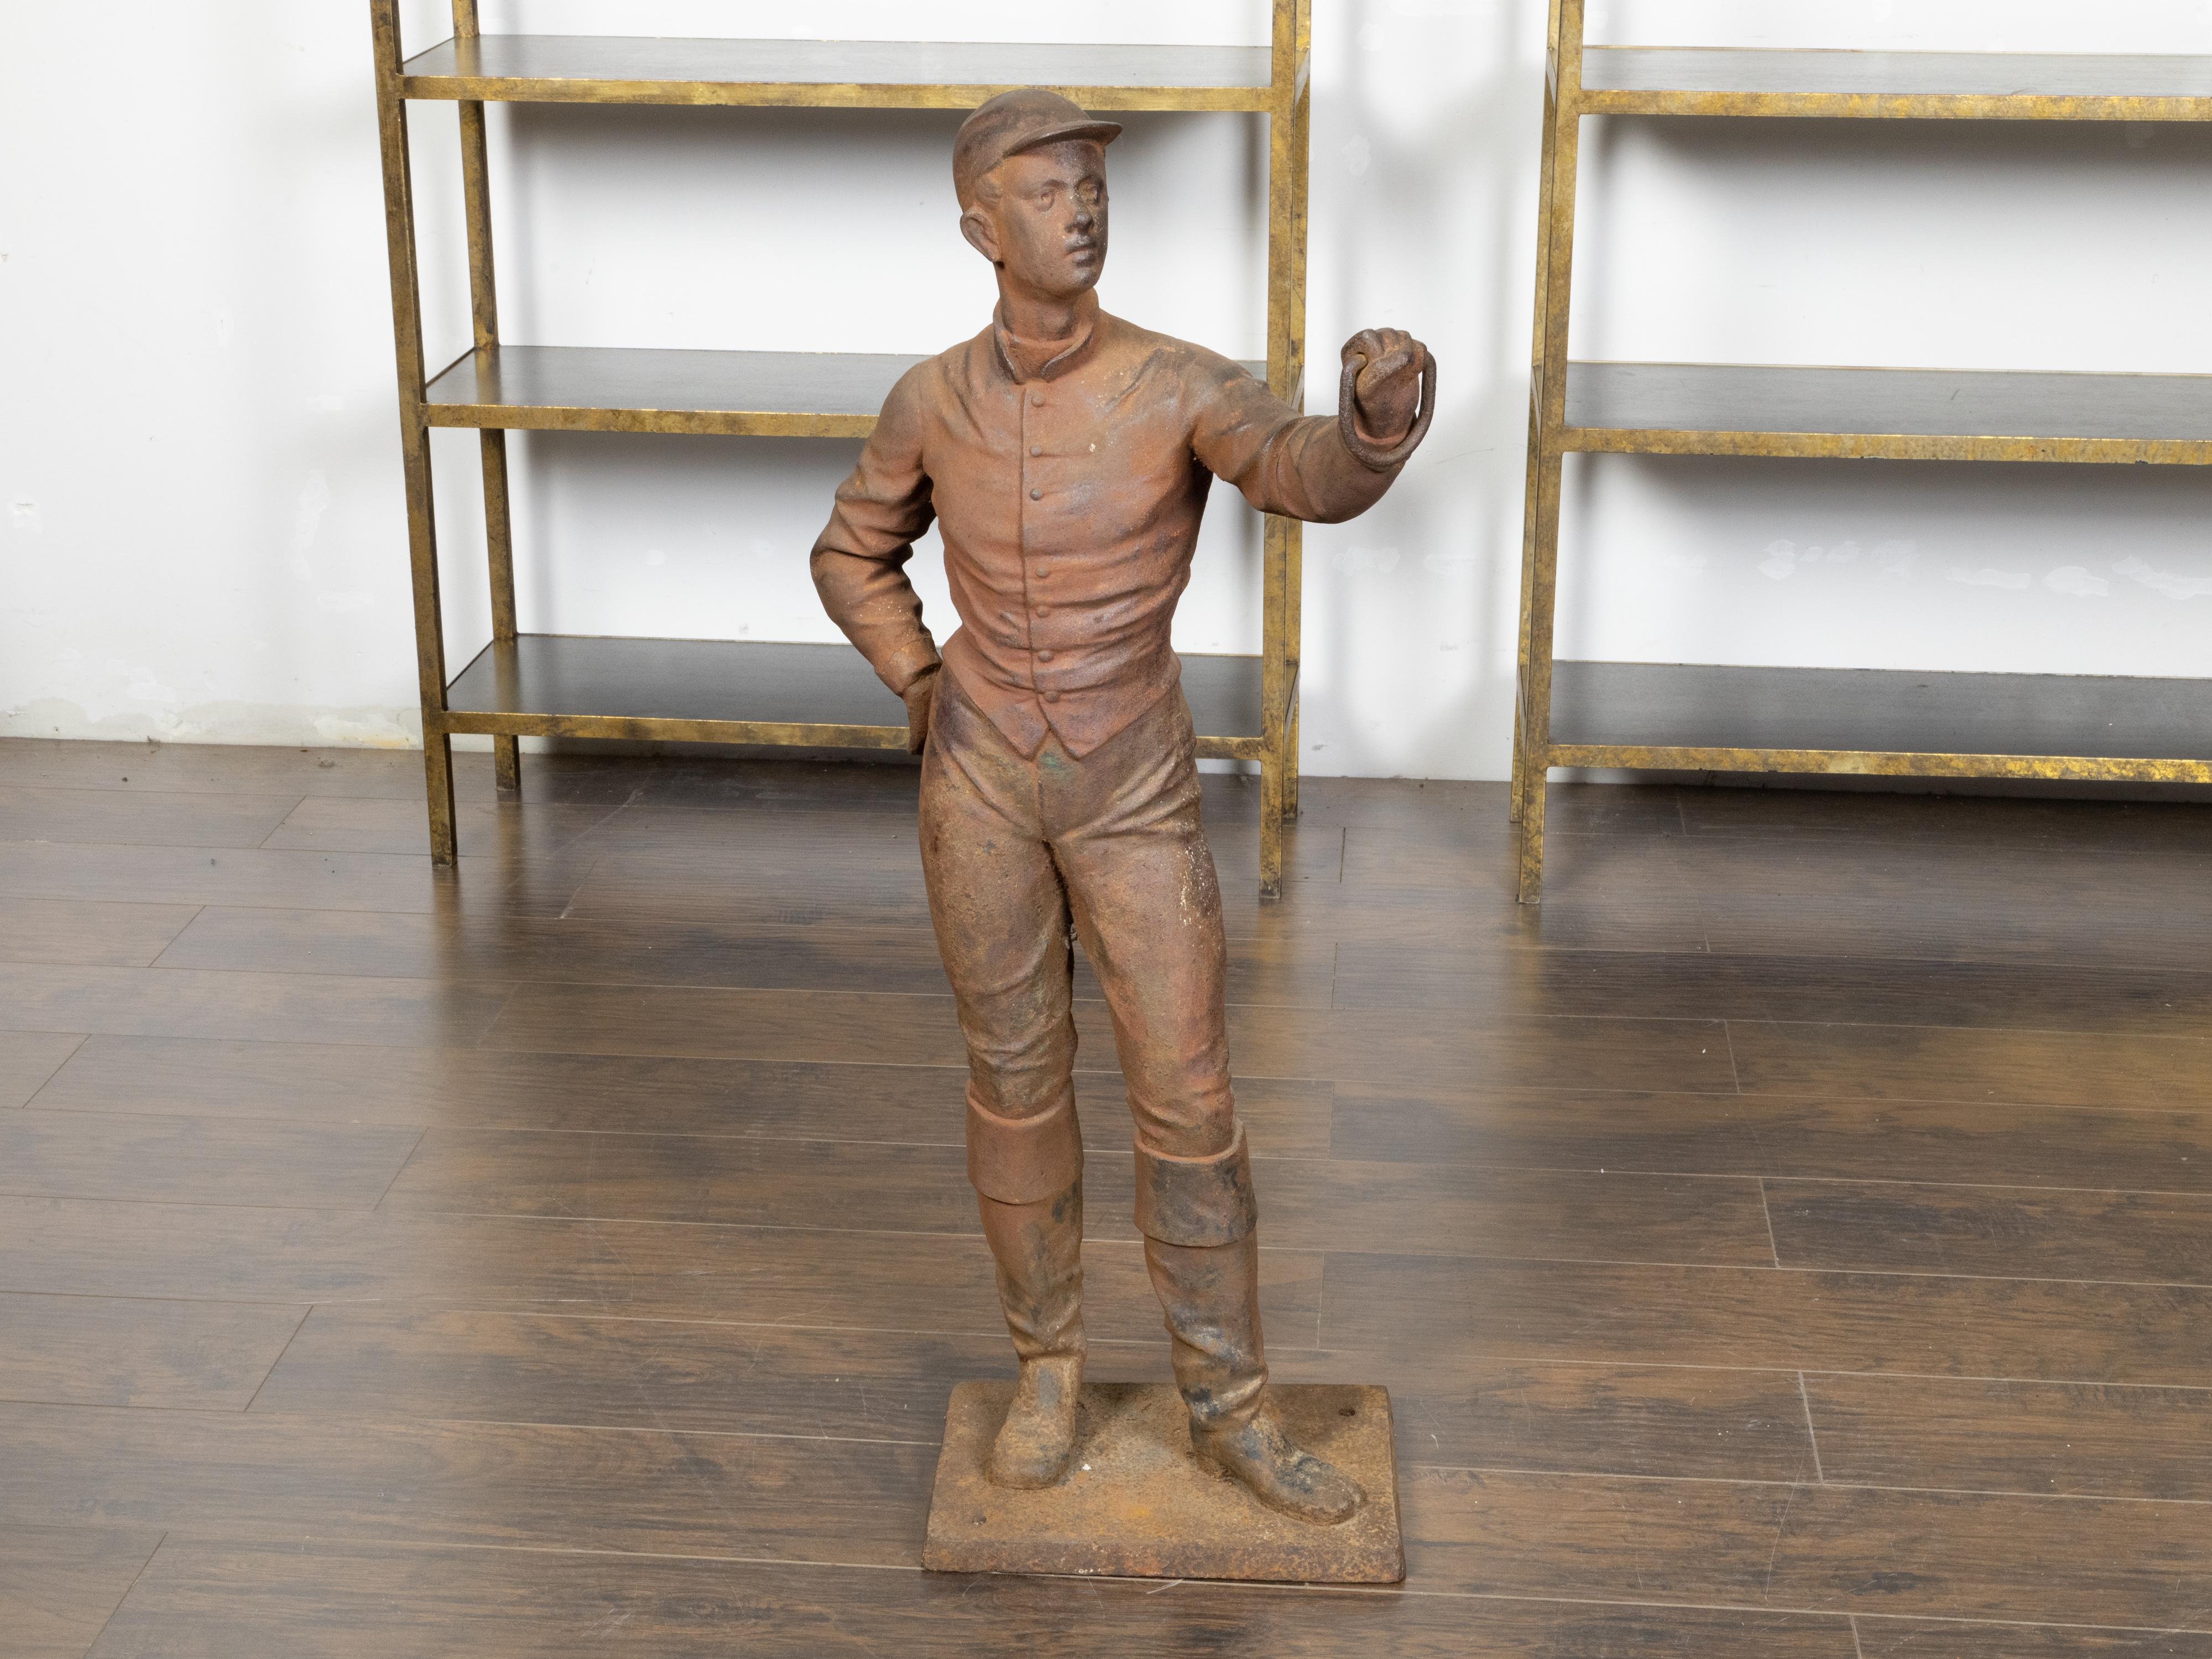 An English Turn of the Century iron sculpture depicting a jockey holding a ring in his left hand. Created in England during the Turn of the Century which saw the transition between the 19th to the 20th century, this iron sculpture depicts a male